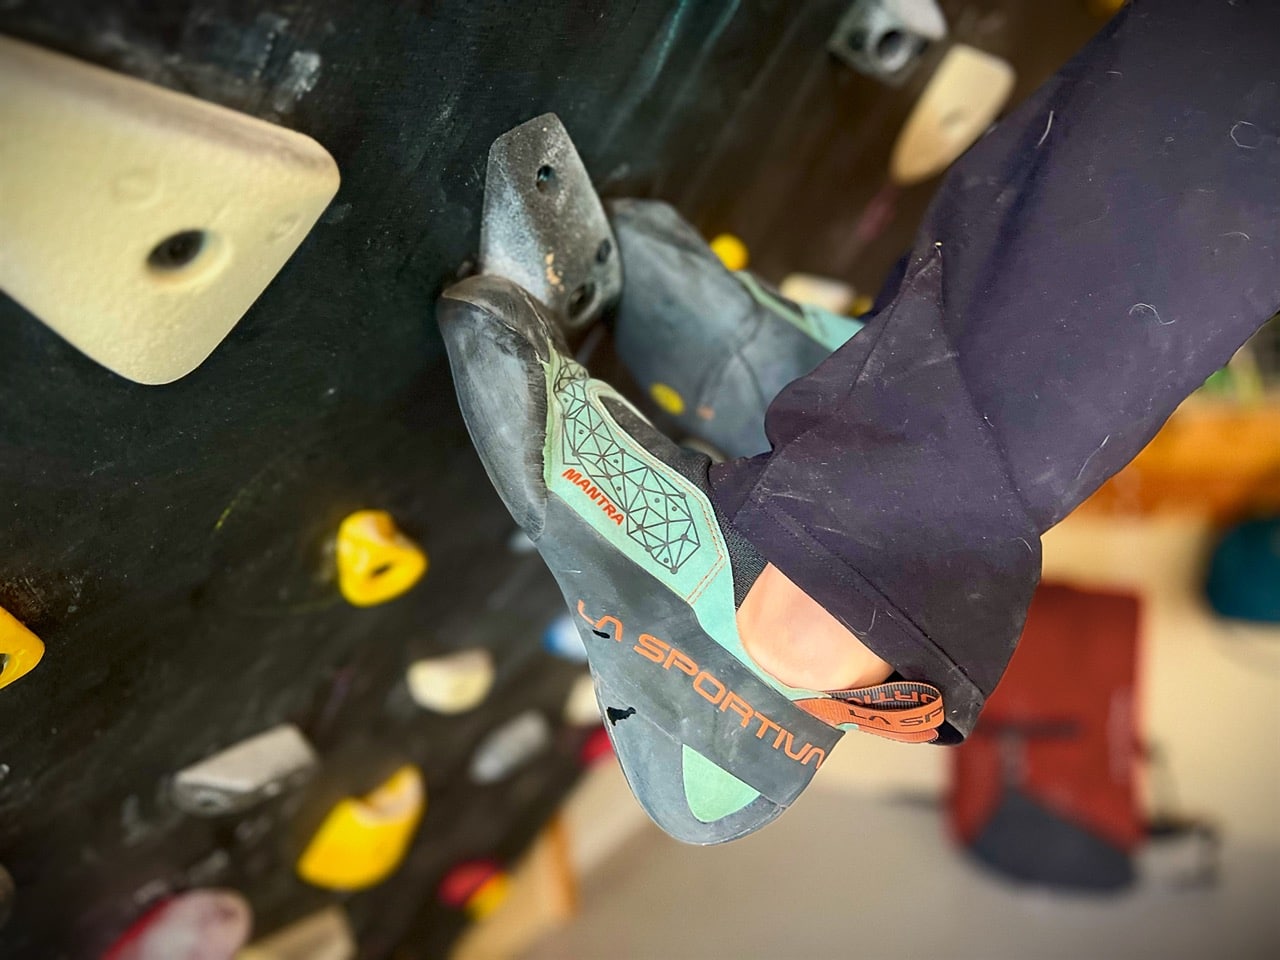 BEST CLIMBING SHOES EXPLAINED- Which climbing shoes are right for